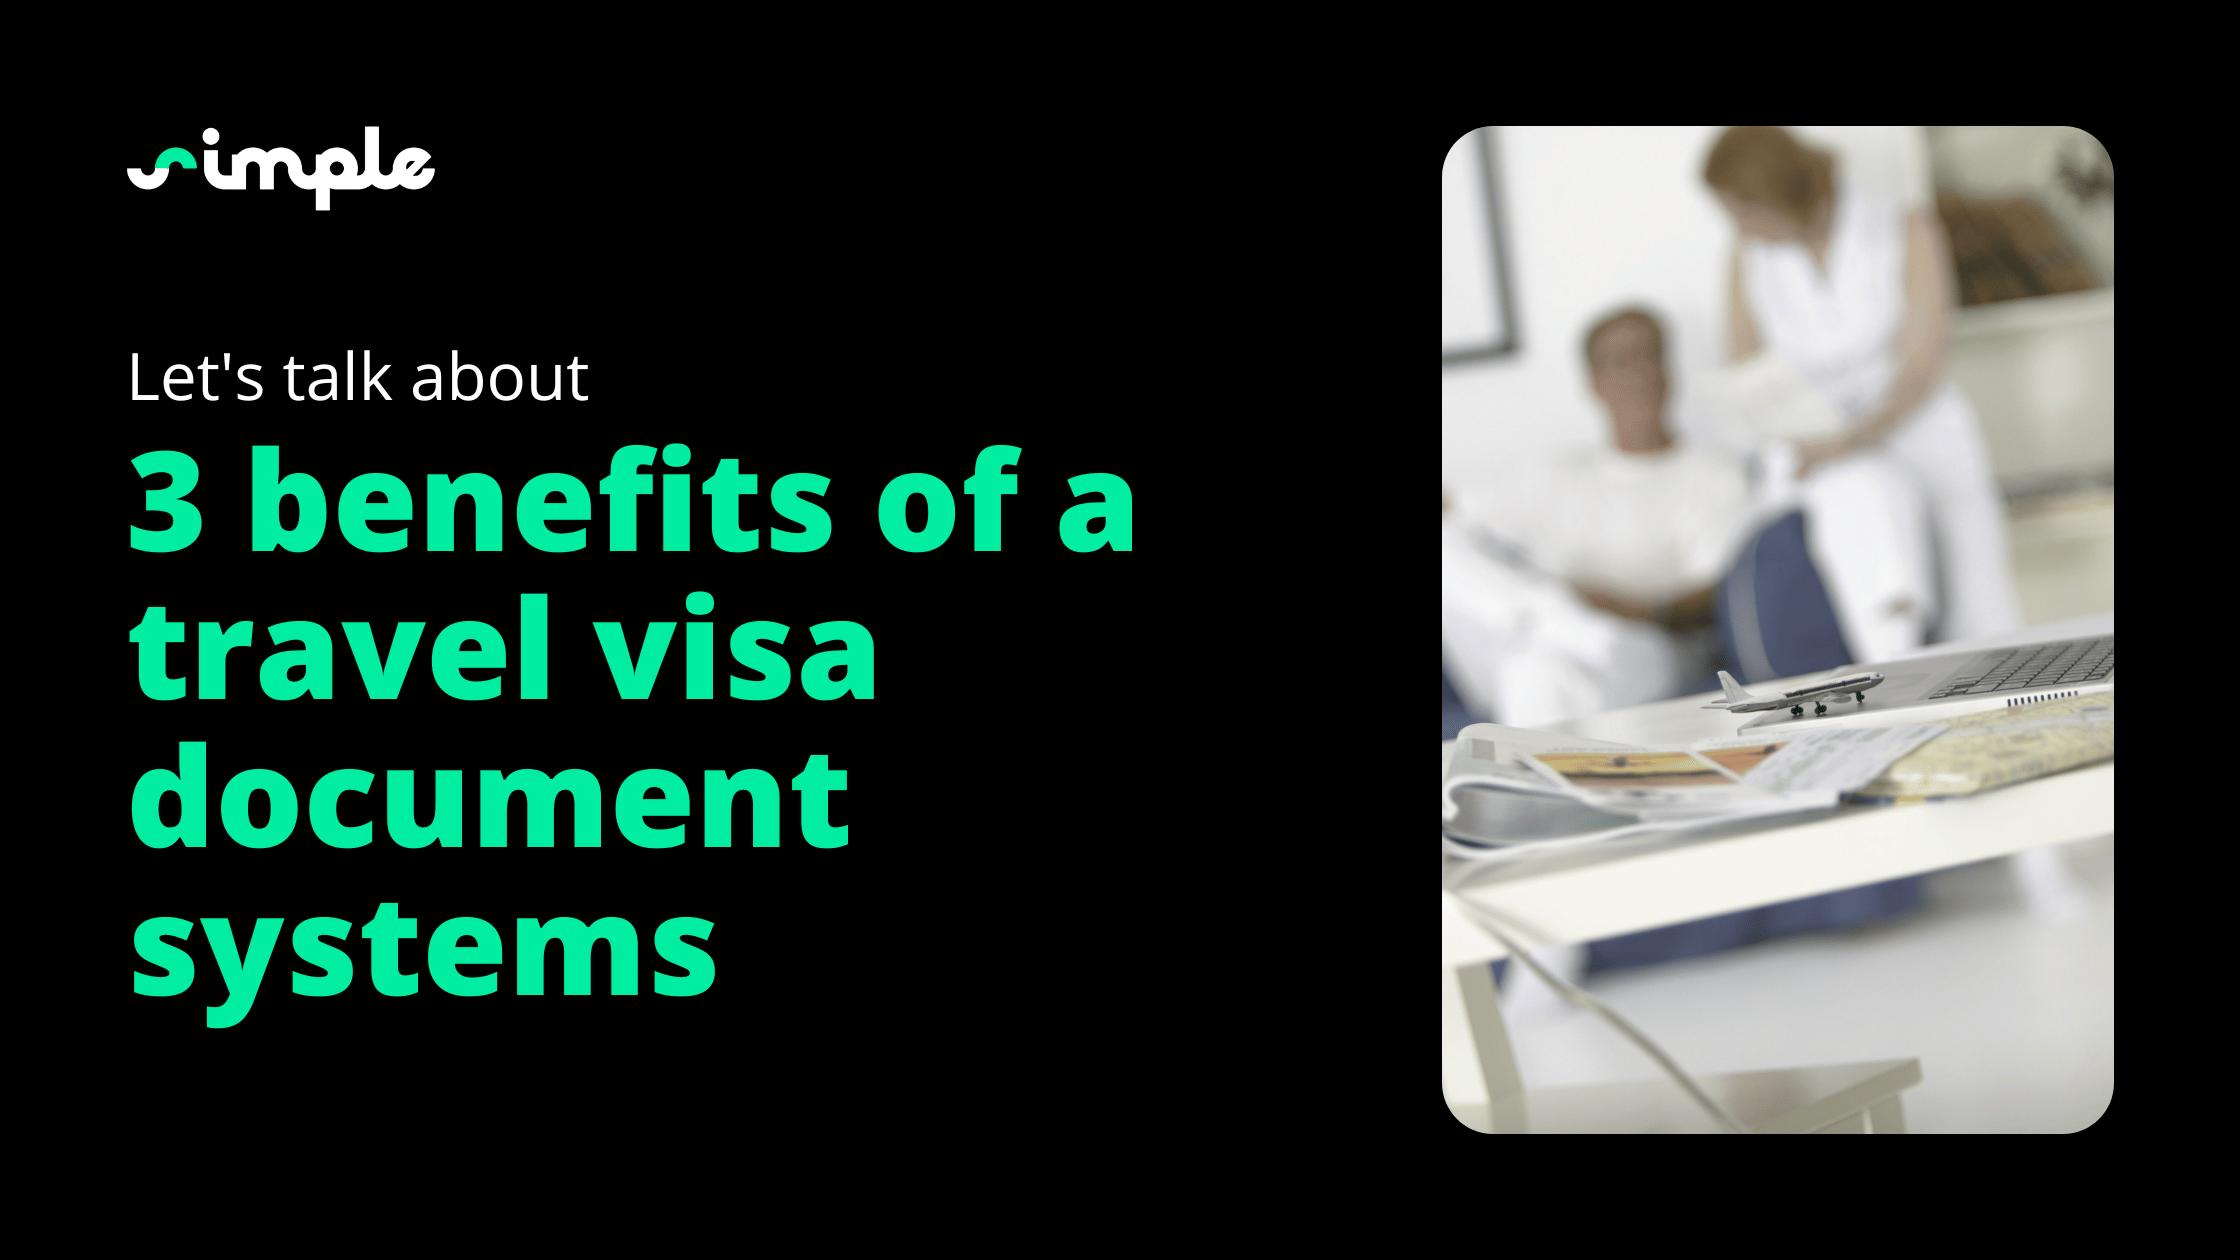 3 benefits of a travel visa document systems